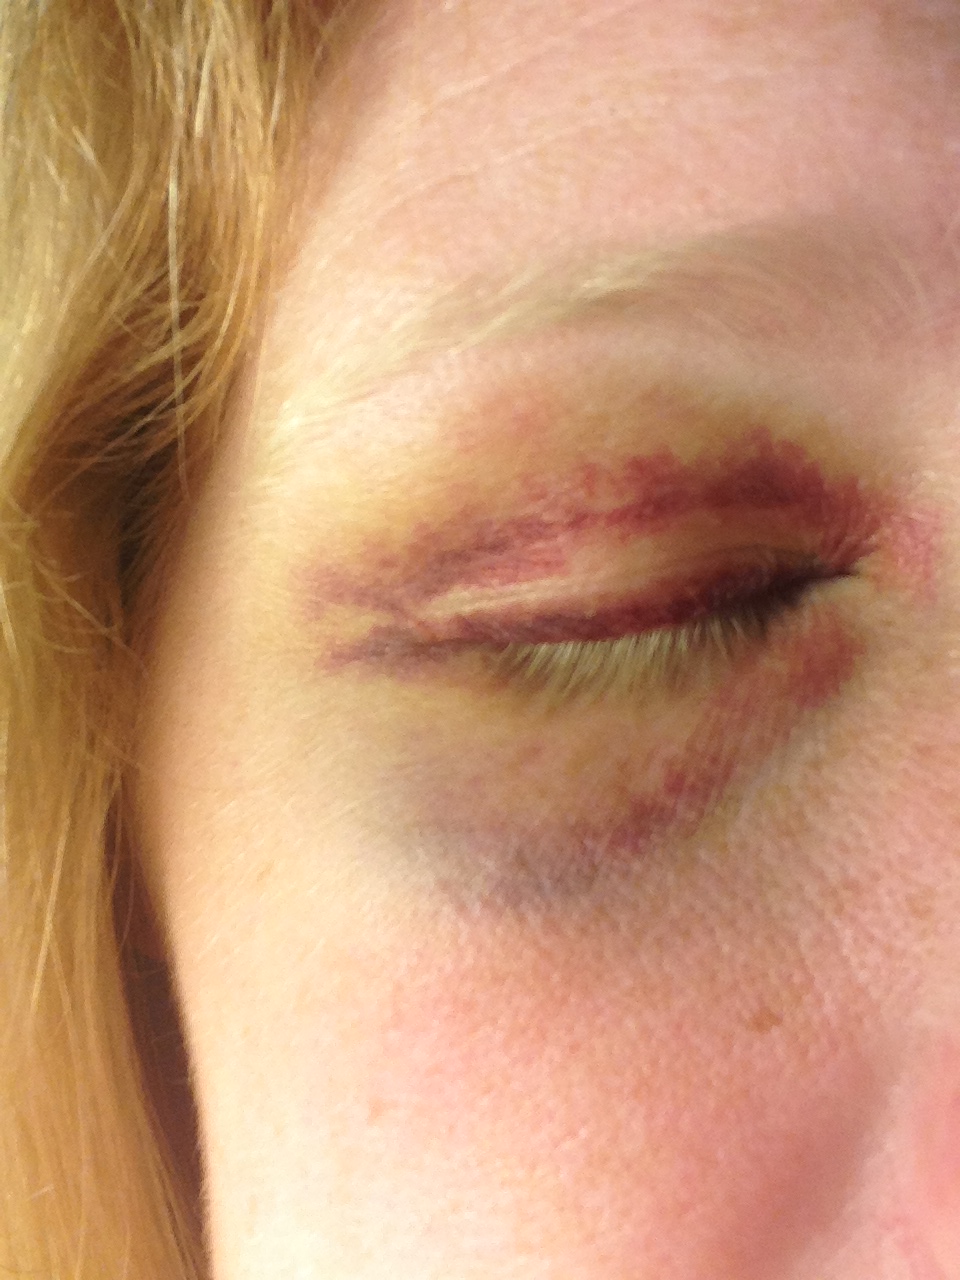 Black eye update. Actually looks worse in person than this, lol